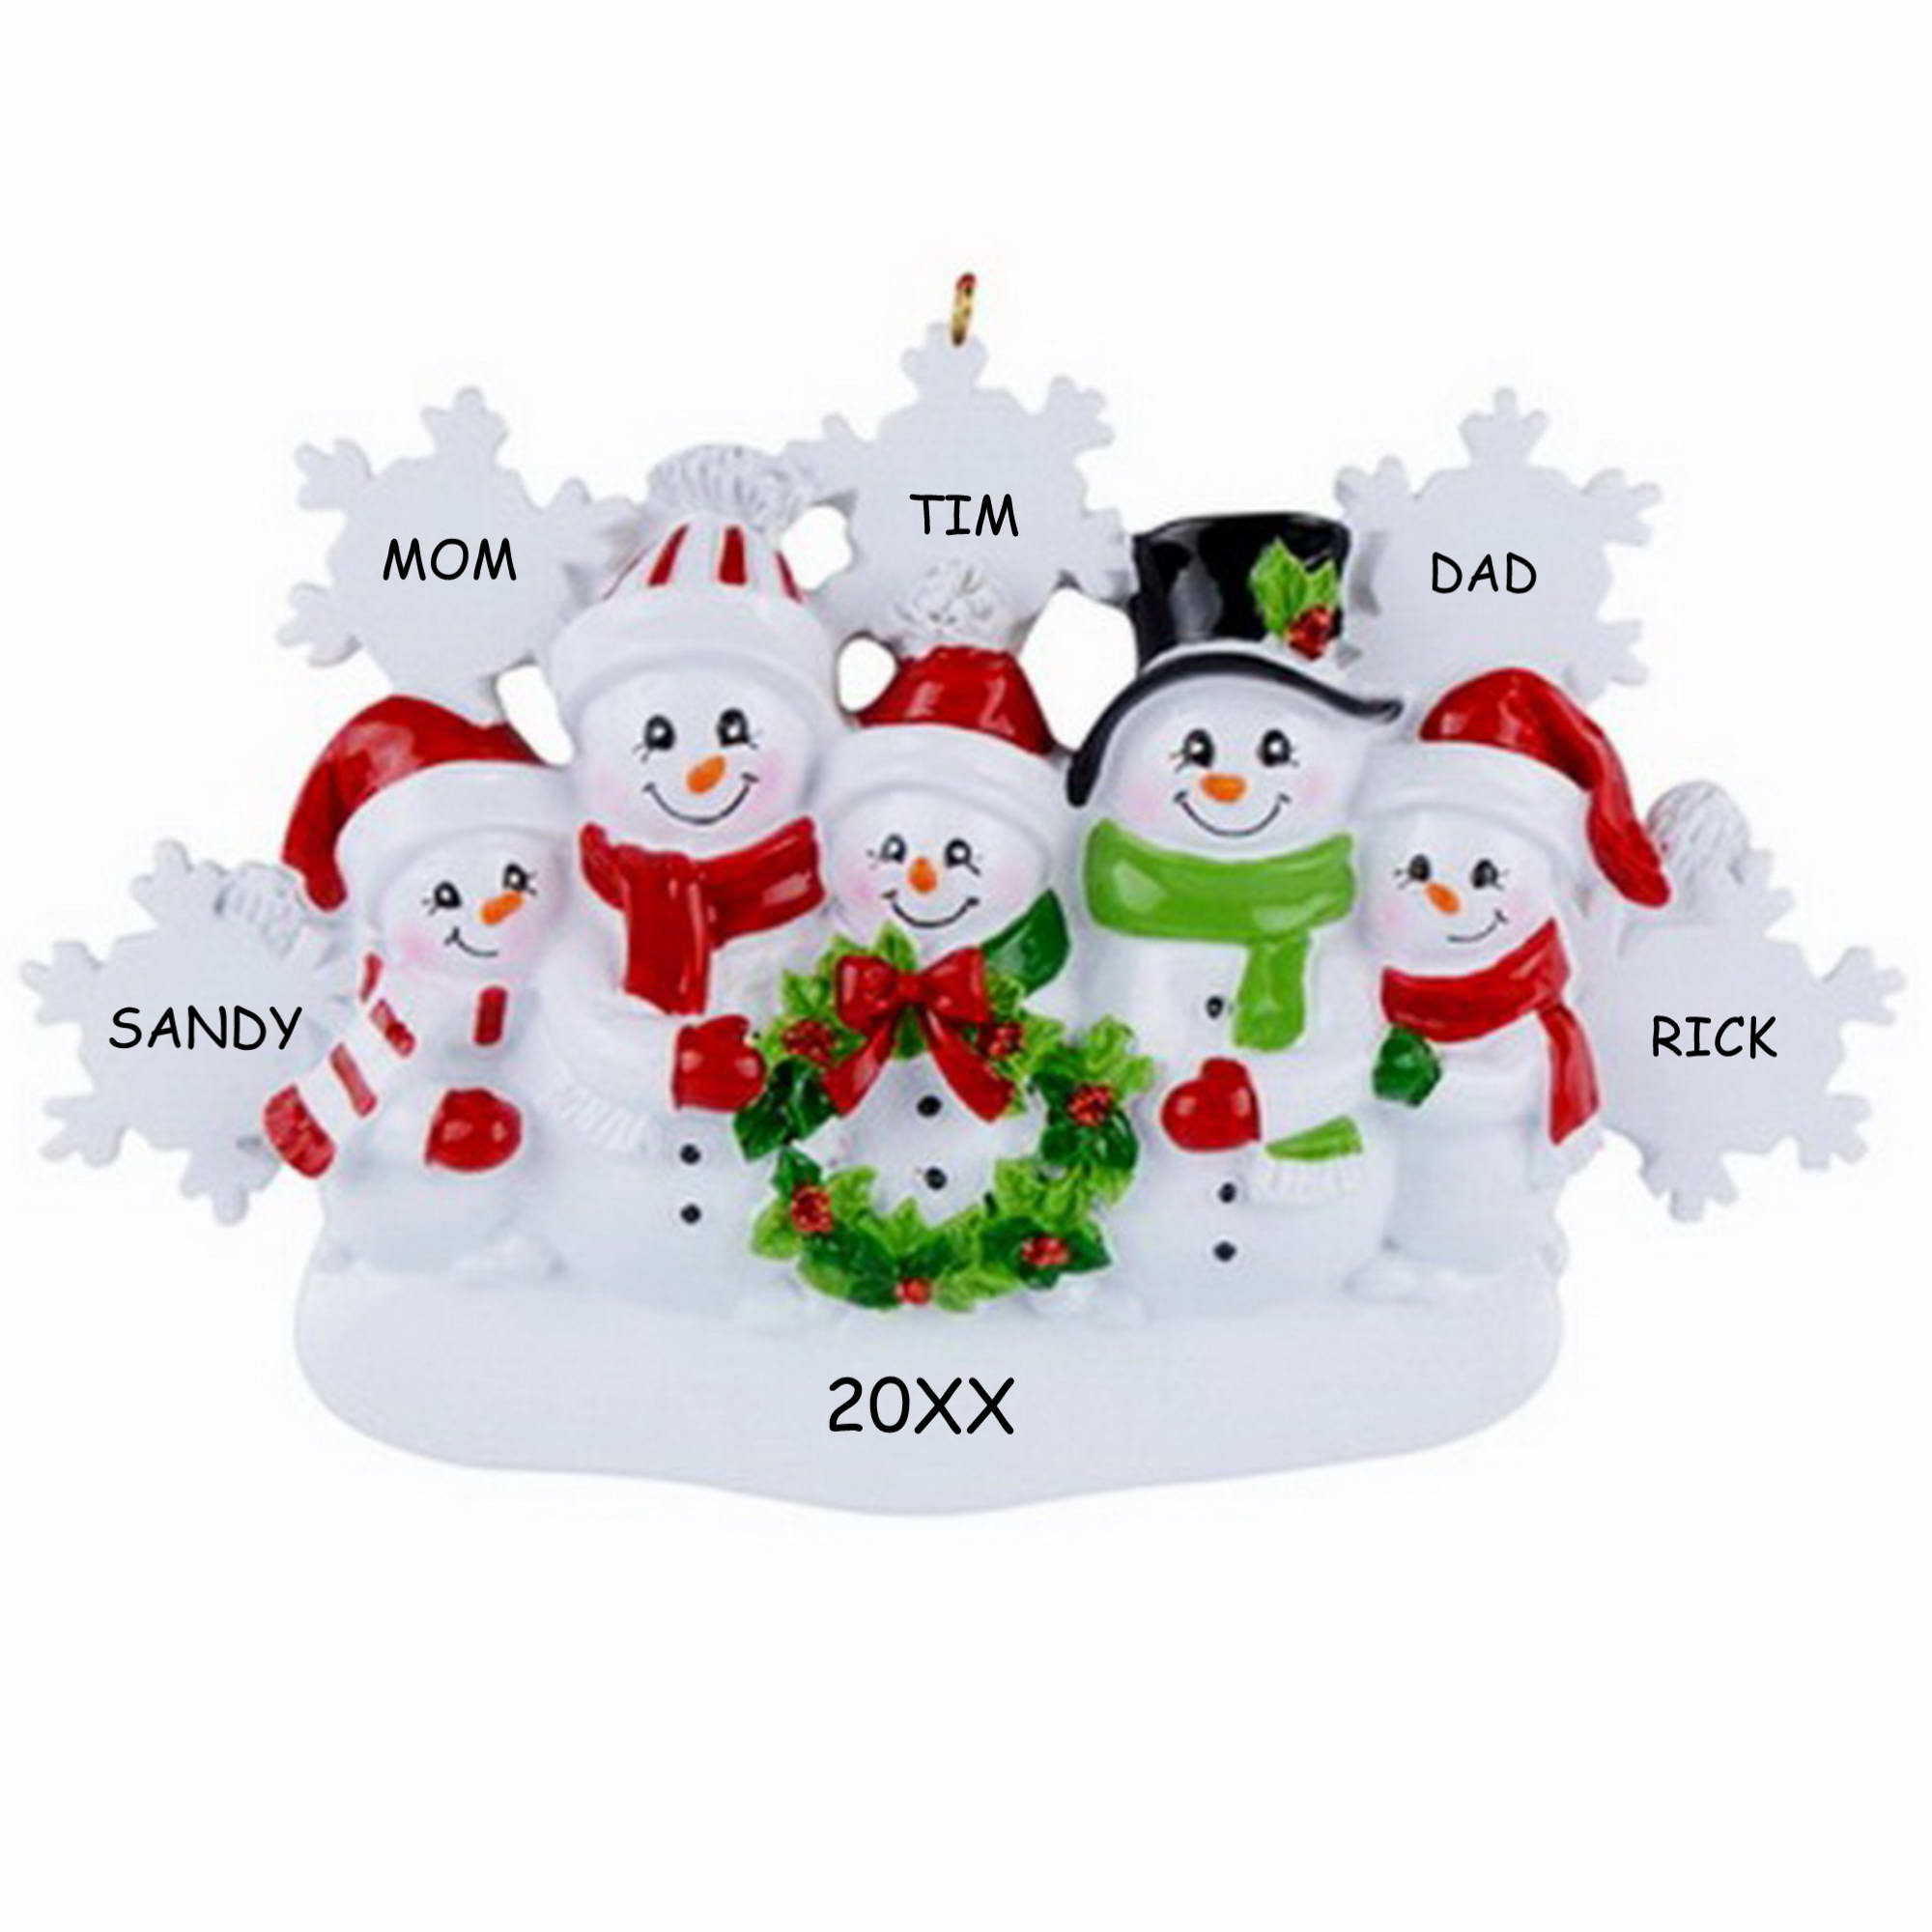 Personalized Festive Snowman Family Christmas Ornament - Family of 5